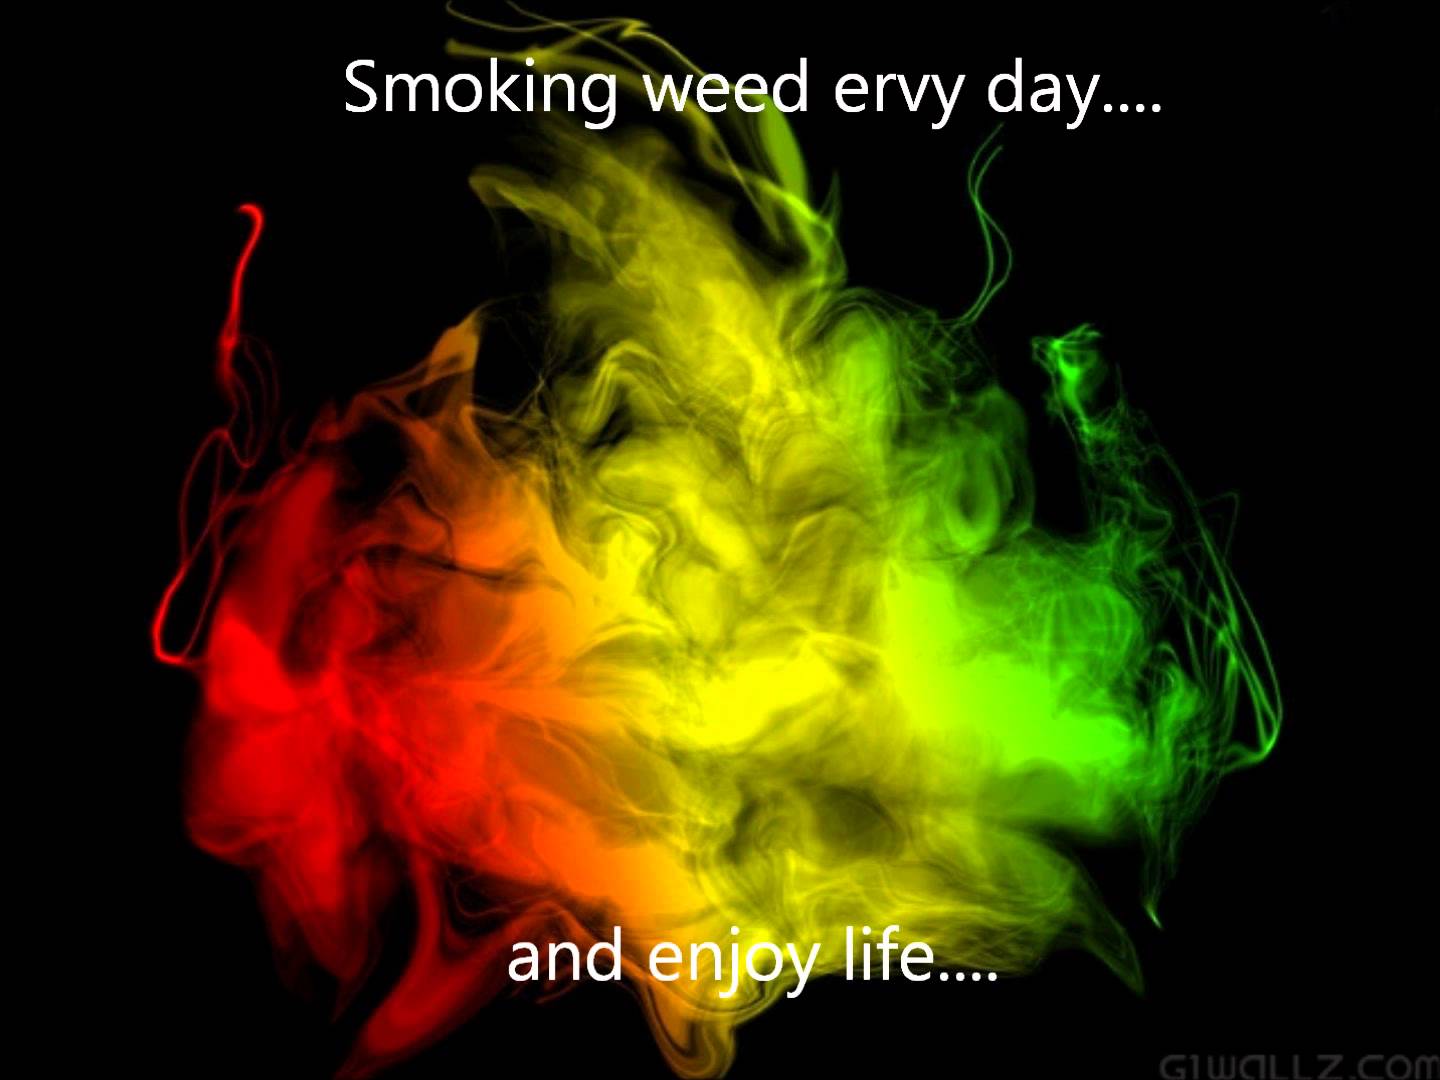 Best Song To Smoke Weed On It 1080p Wallpaper Wp2002706 Smoking Image Full HD